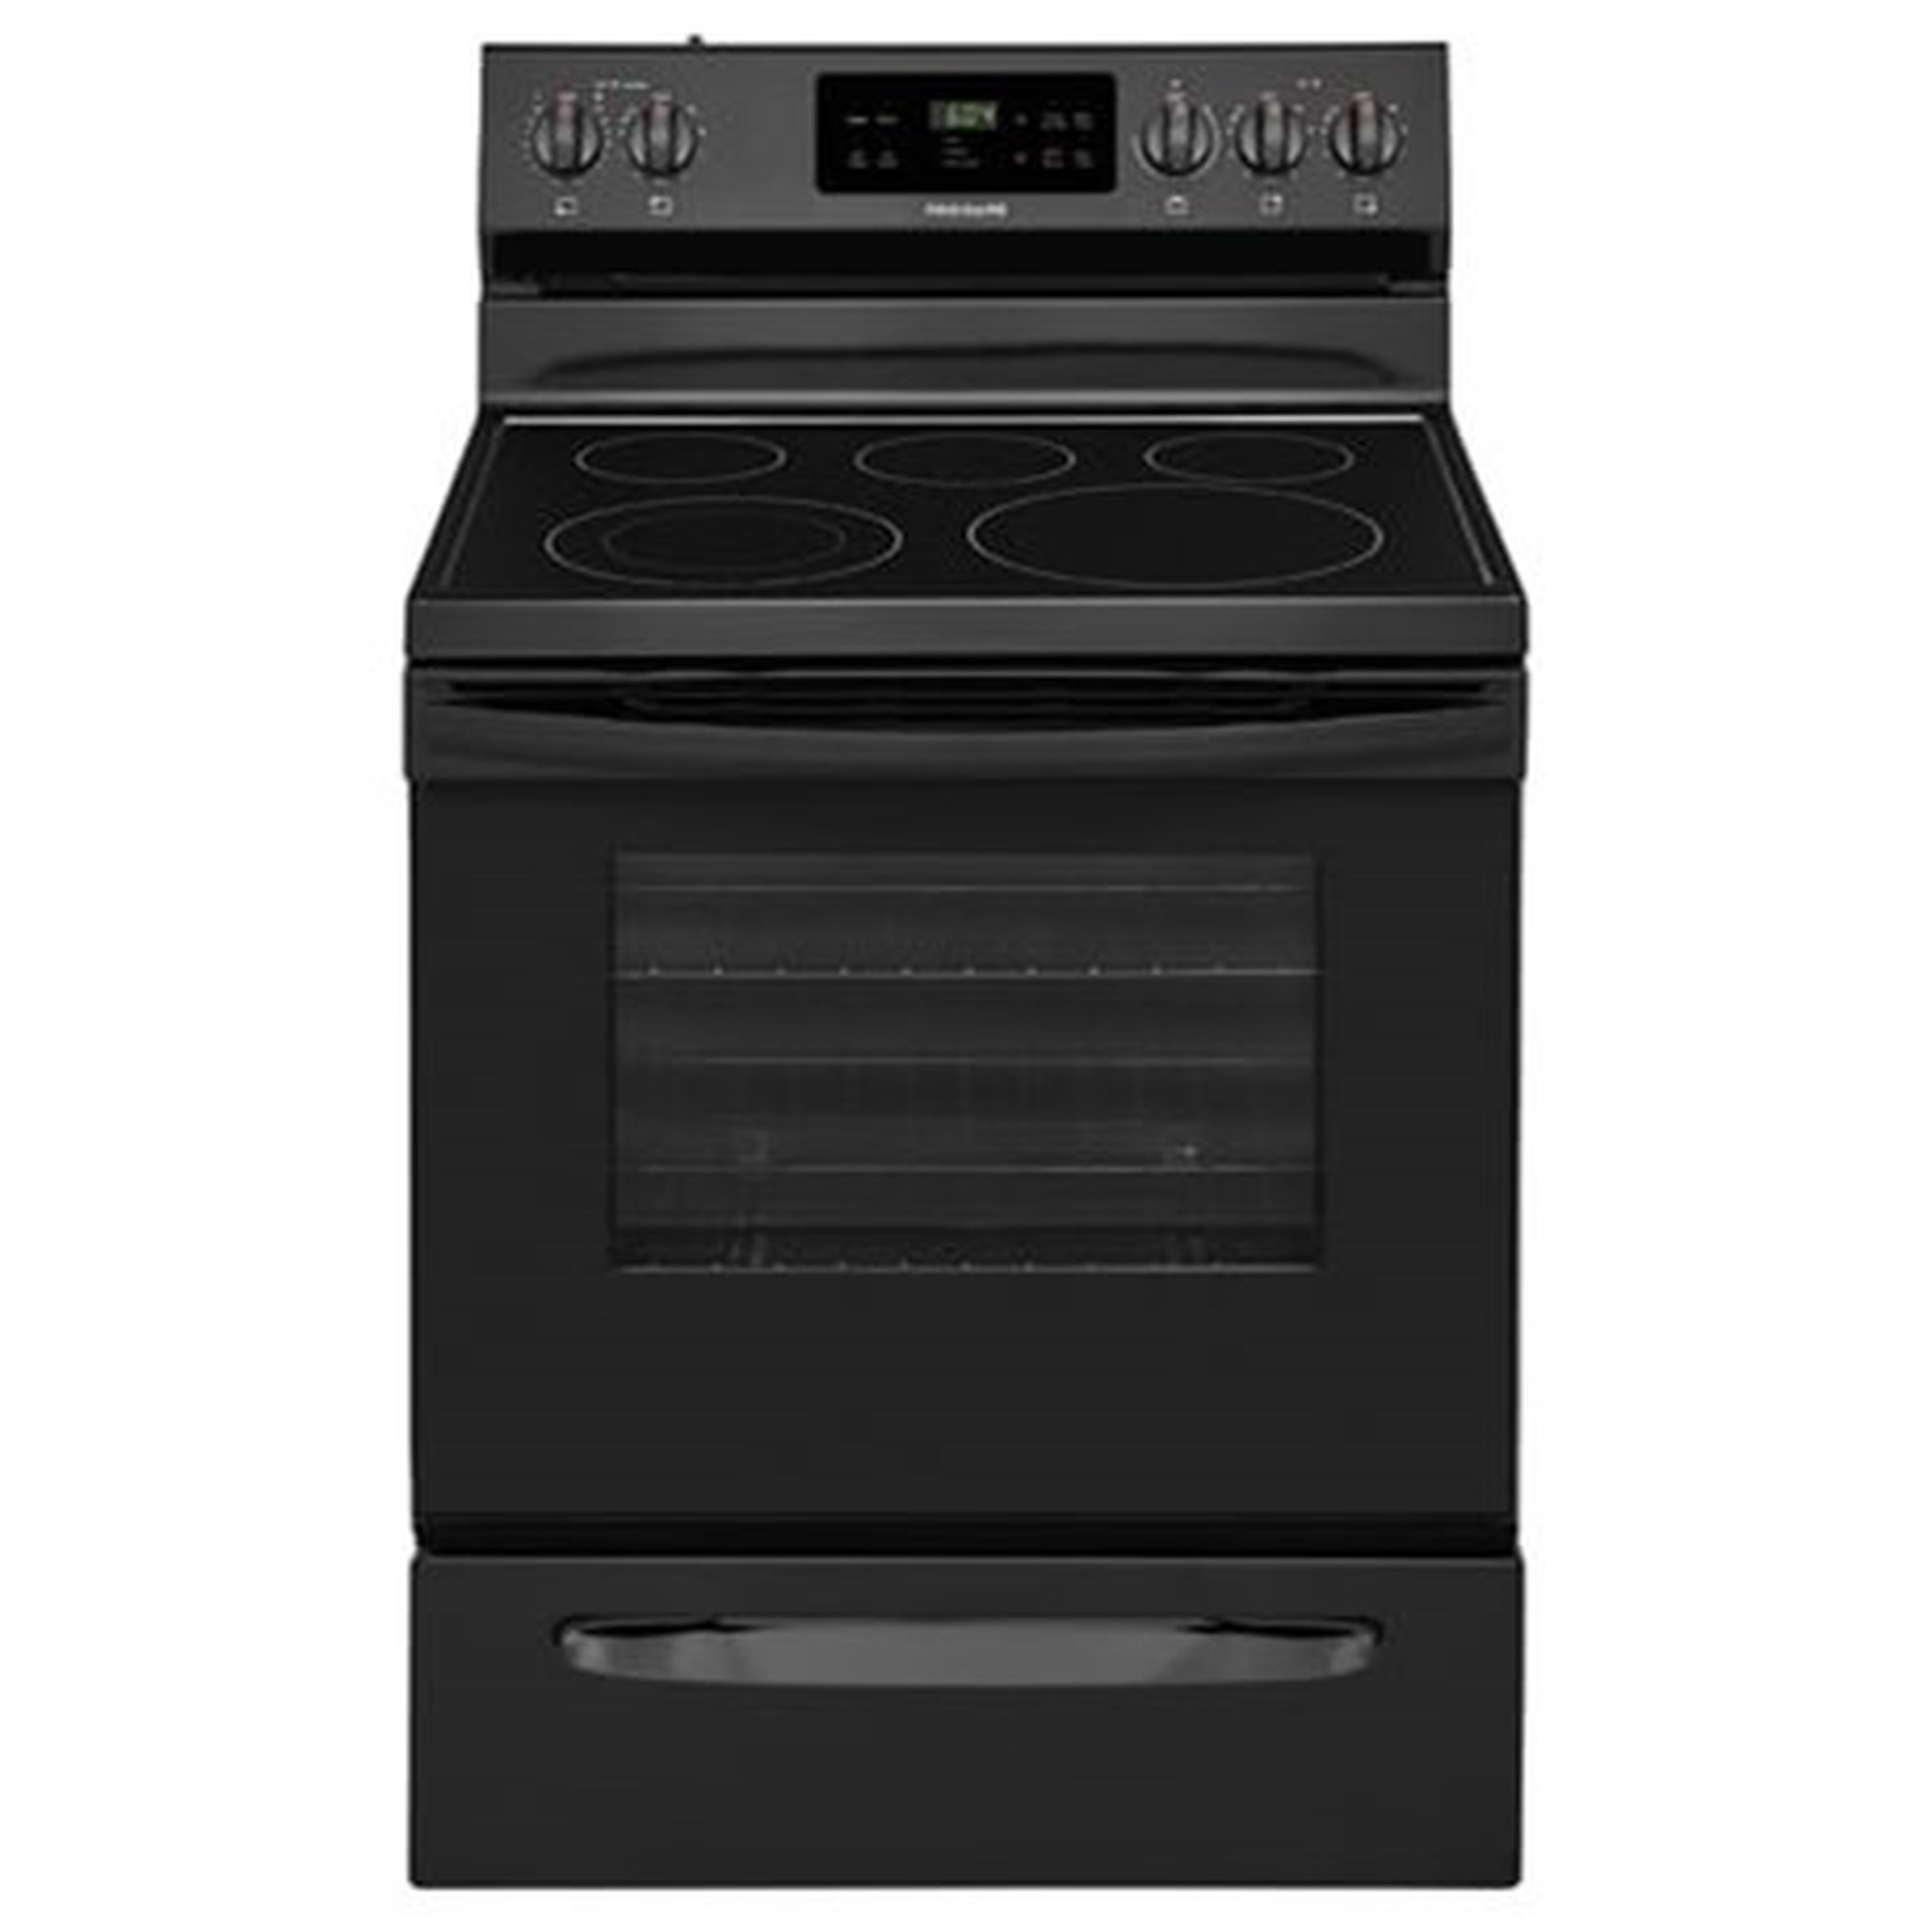 Frigidaire 825-13779-7 30 Electric Range with Quick Boil